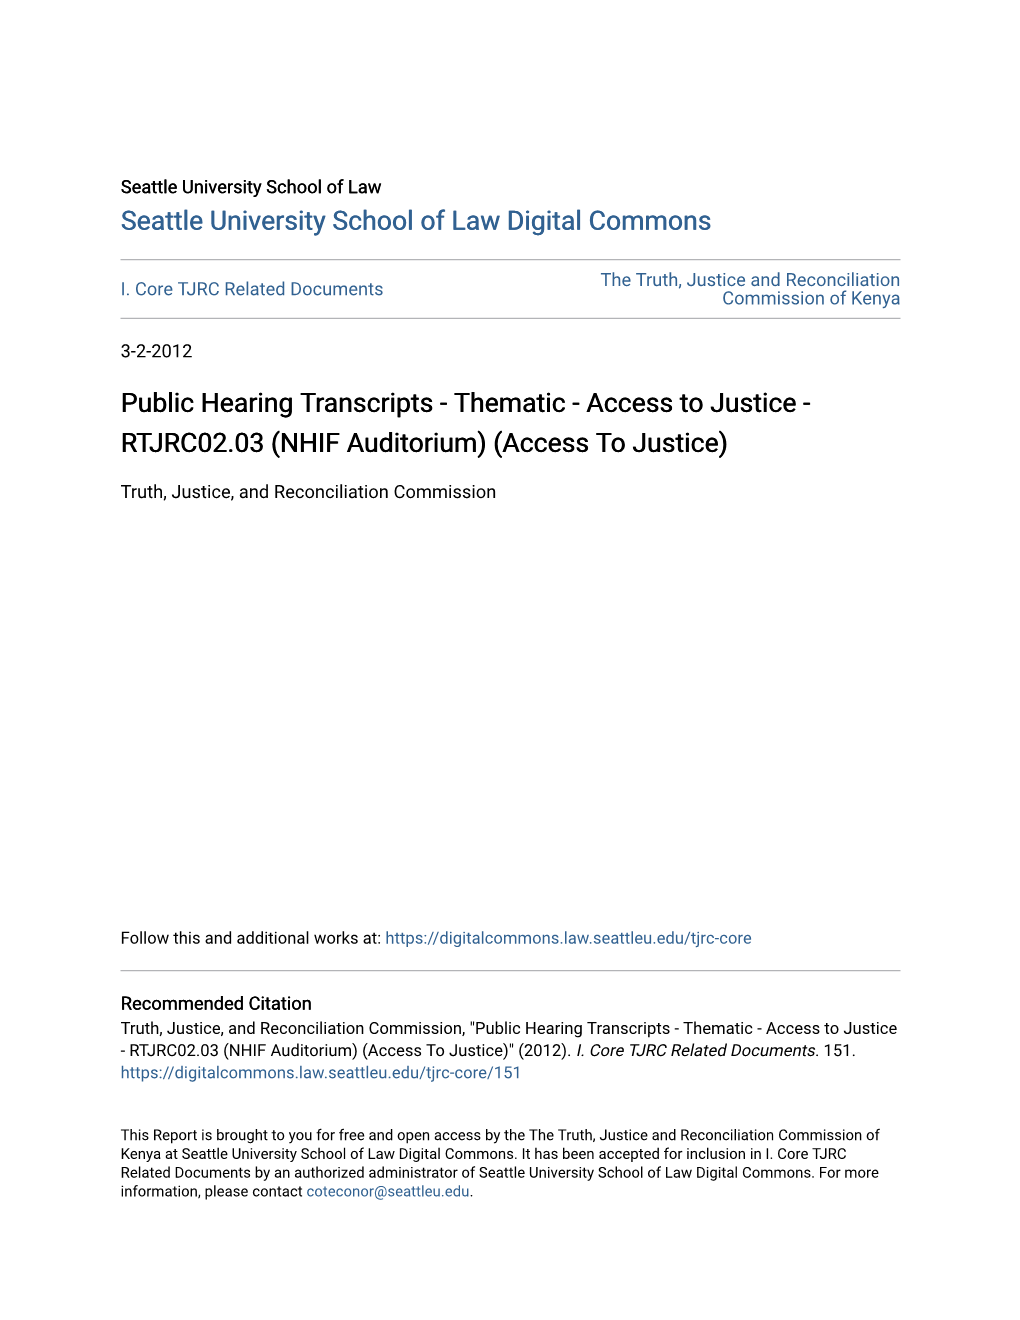 Public Hearing Transcripts - Thematic - Access to Justice - RTJRC02.03 (NHIF Auditorium) (Access to Justice)